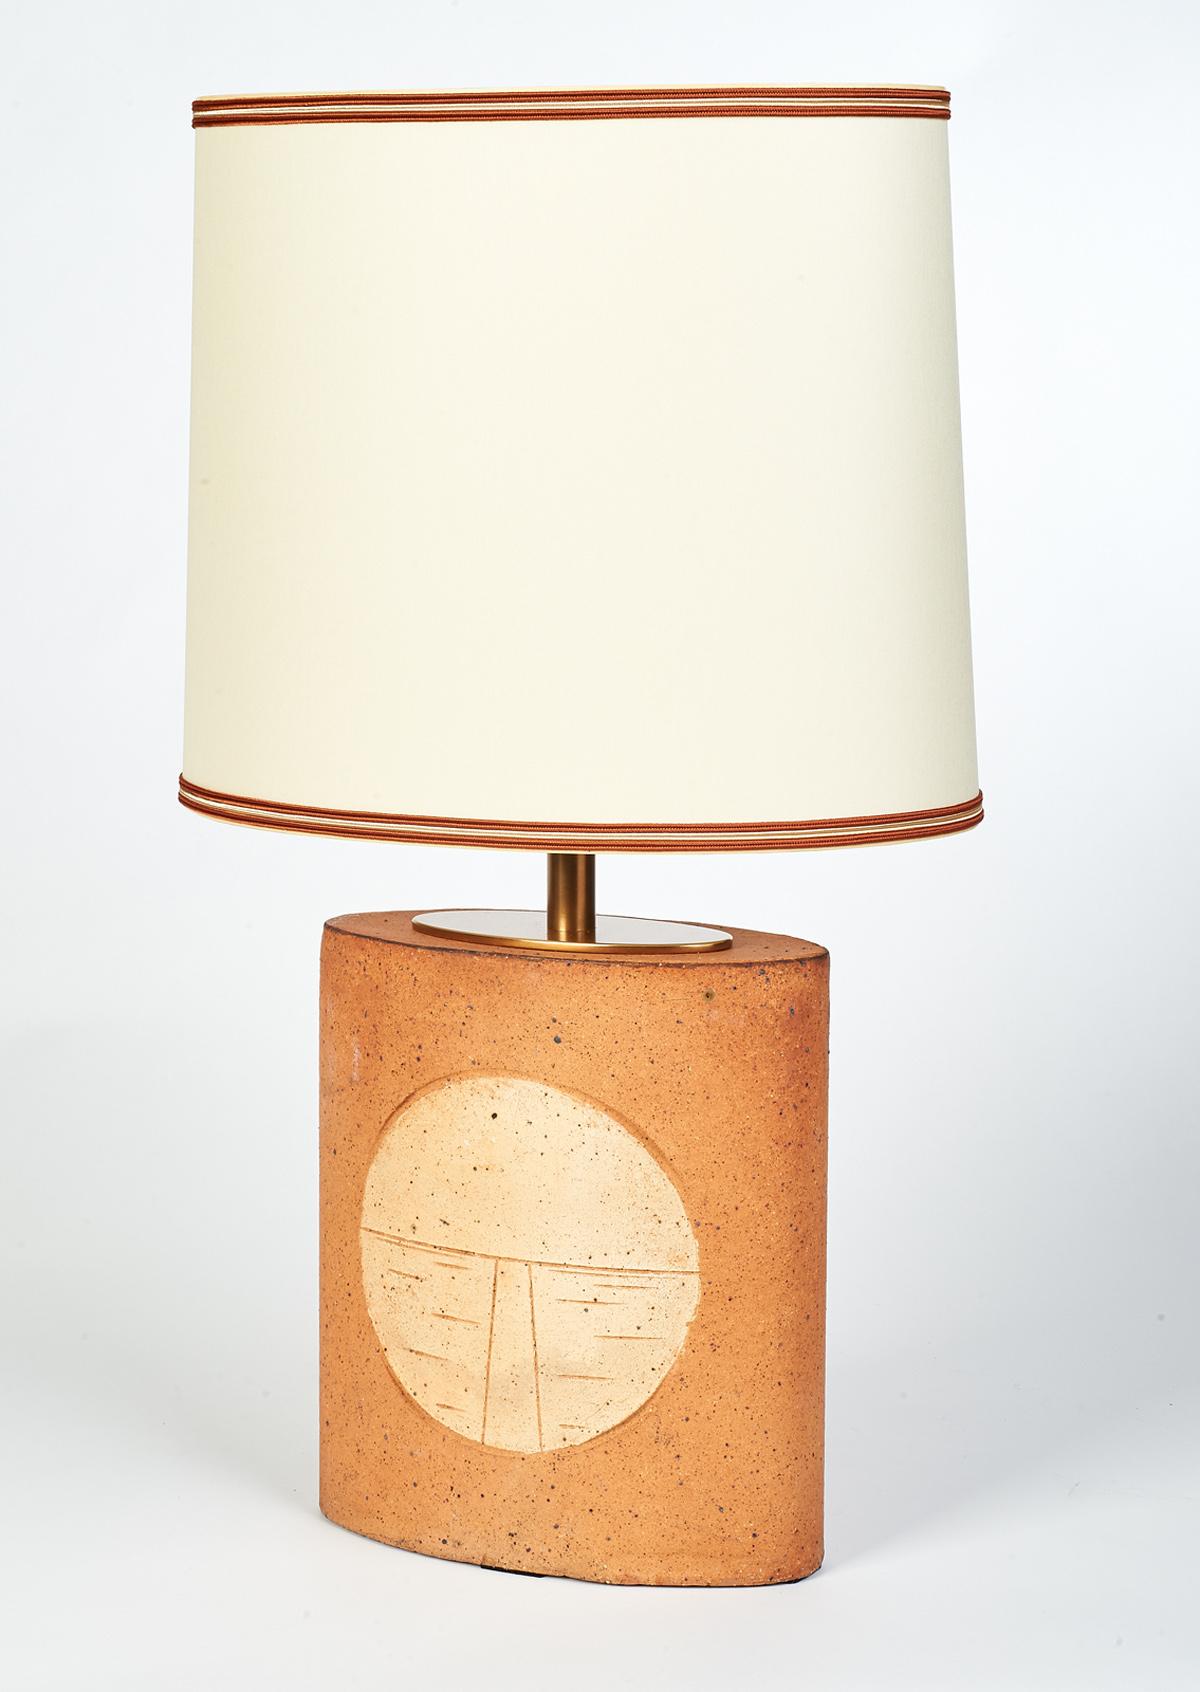 France, 1970s
Two unglazed oval ceramic table lamps incised with abstract geometric motifs.
The other lamp in the pair is the same model but a different geometric motif  (see last two images)
SOLD AND PRICED INDIVIDUALLY
Dimensions: 23 H x 13 W x